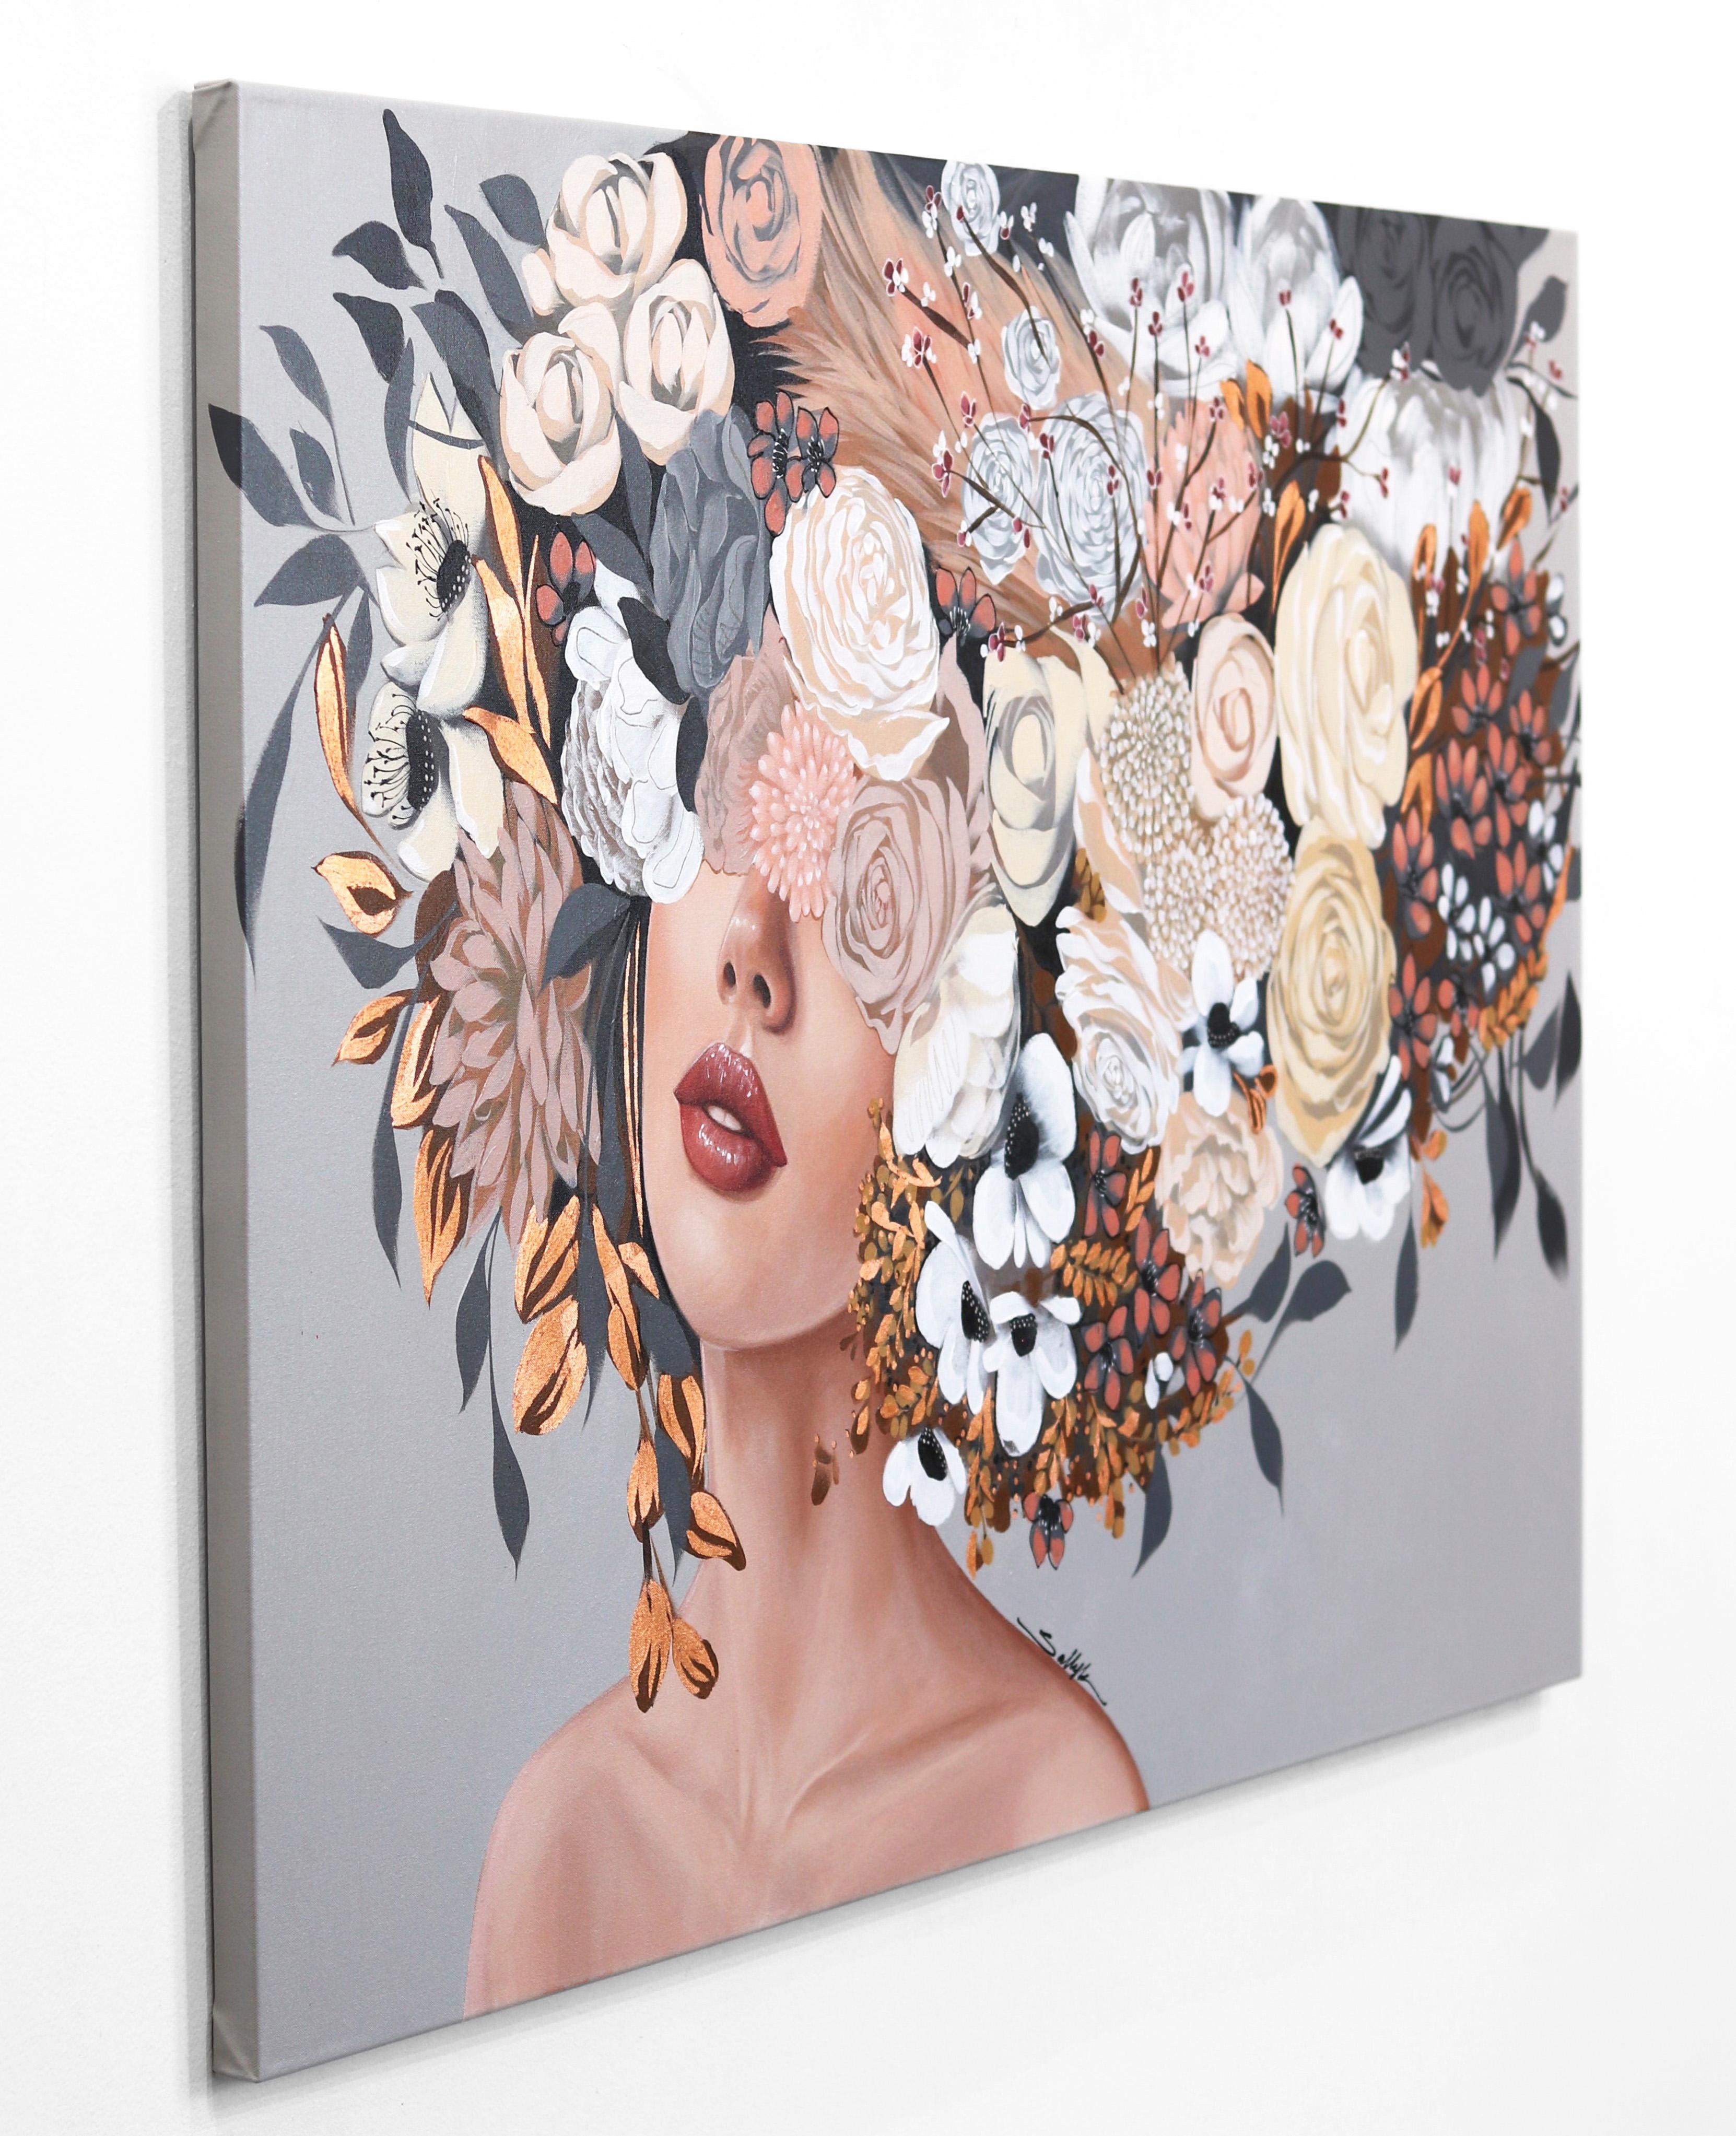 Lebanese American artist Sally K.'s captivating floral portraits are both mesmerizing and empowering.  Her pop-realistic paintings are inspired by strong, feminine women, celebrating the individuality and inherent strength of the female experience.